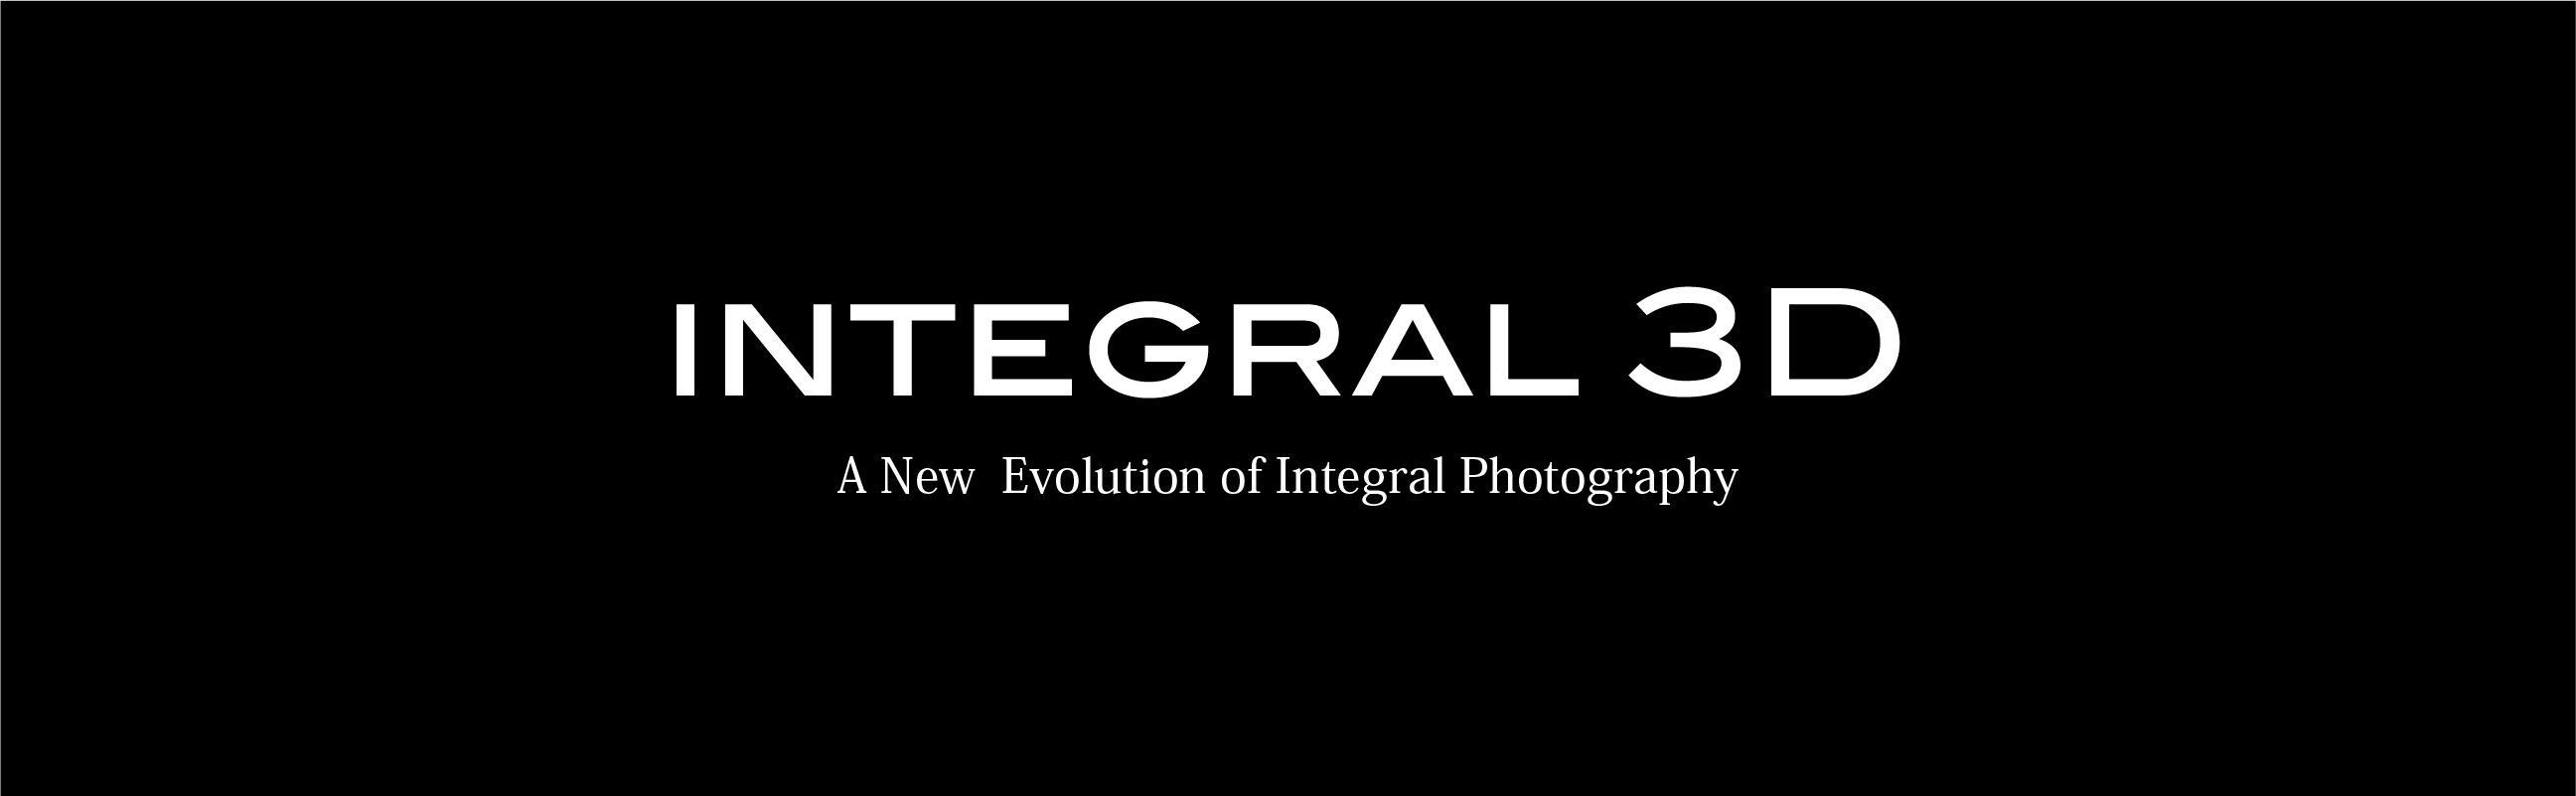 INTEGRAL 3D  A new evolution of integral photograhy